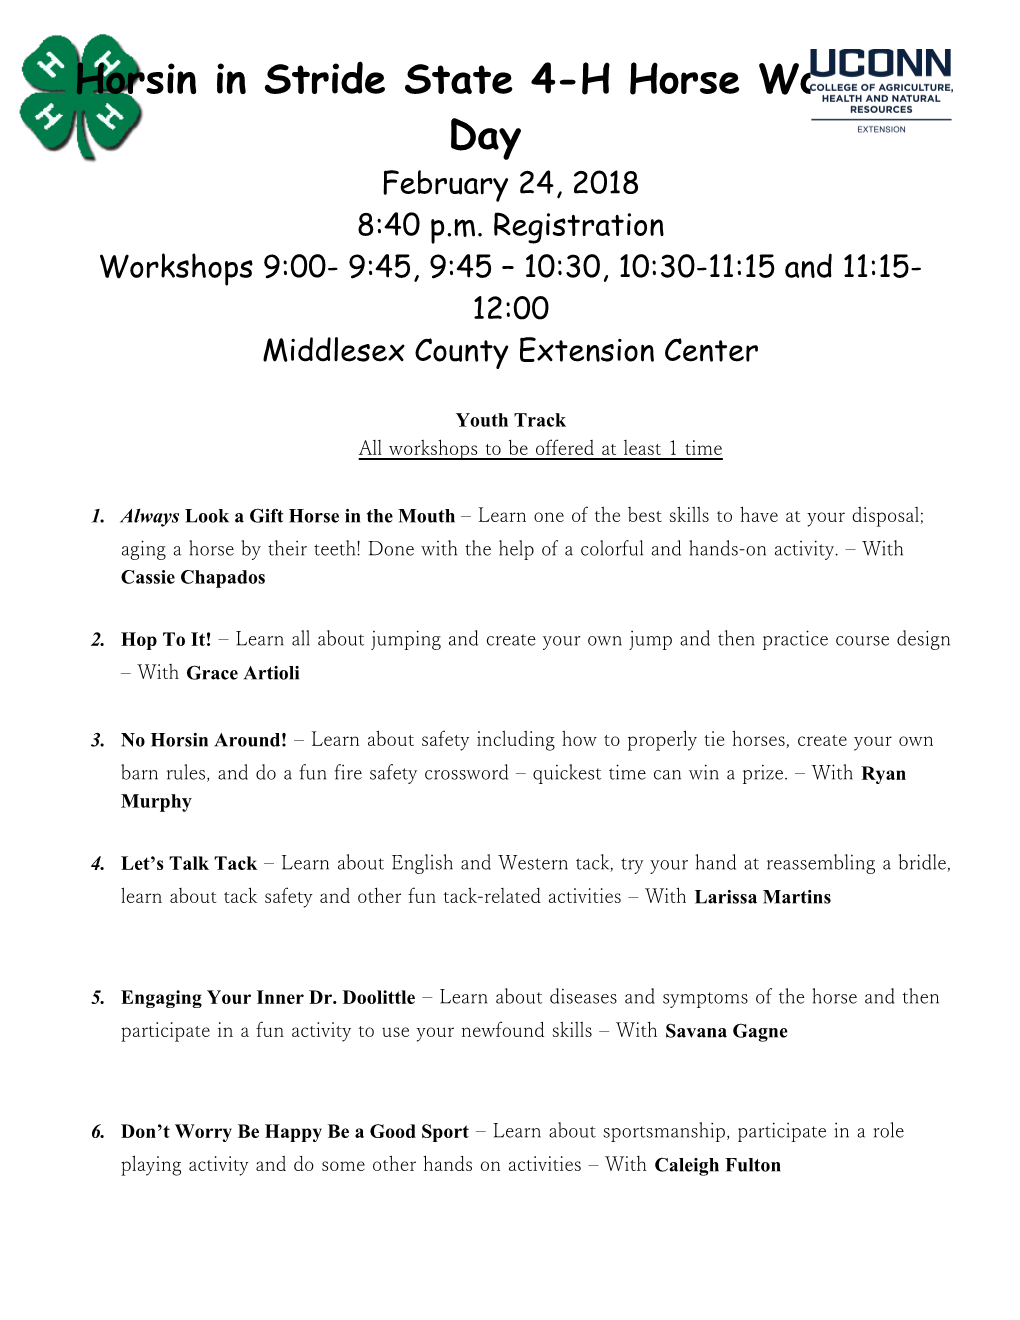 Middlesex County 4-H Skill-A-Thon